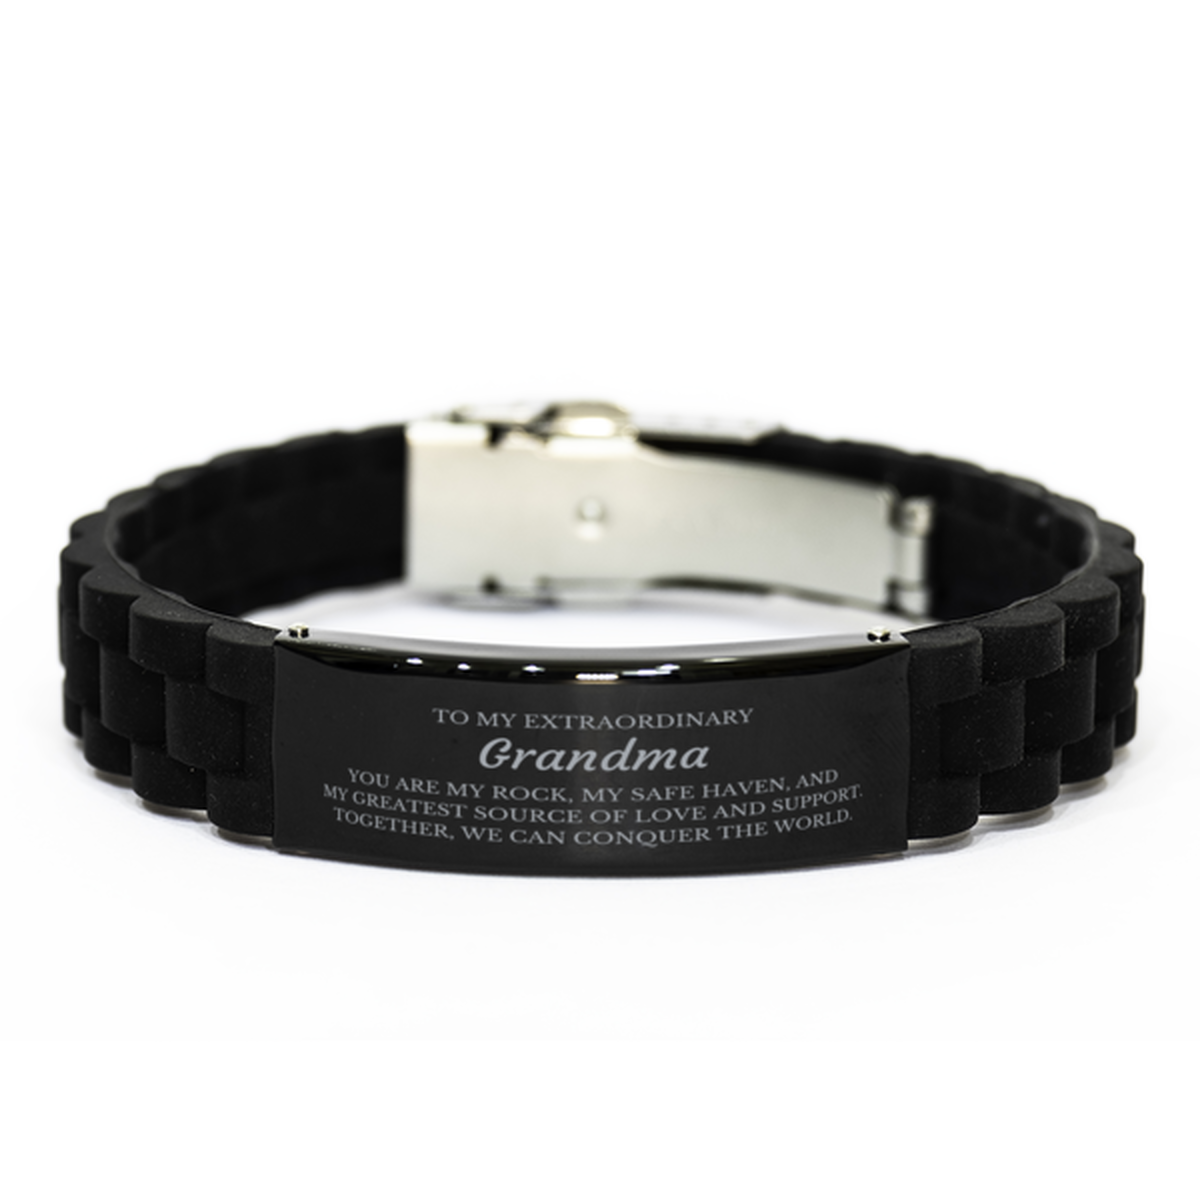 To My Extraordinary Grandma Gifts, Together, we can conquer the world, Birthday Black Glidelock Clasp Bracelet For Grandma, Christmas Gifts For Grandma